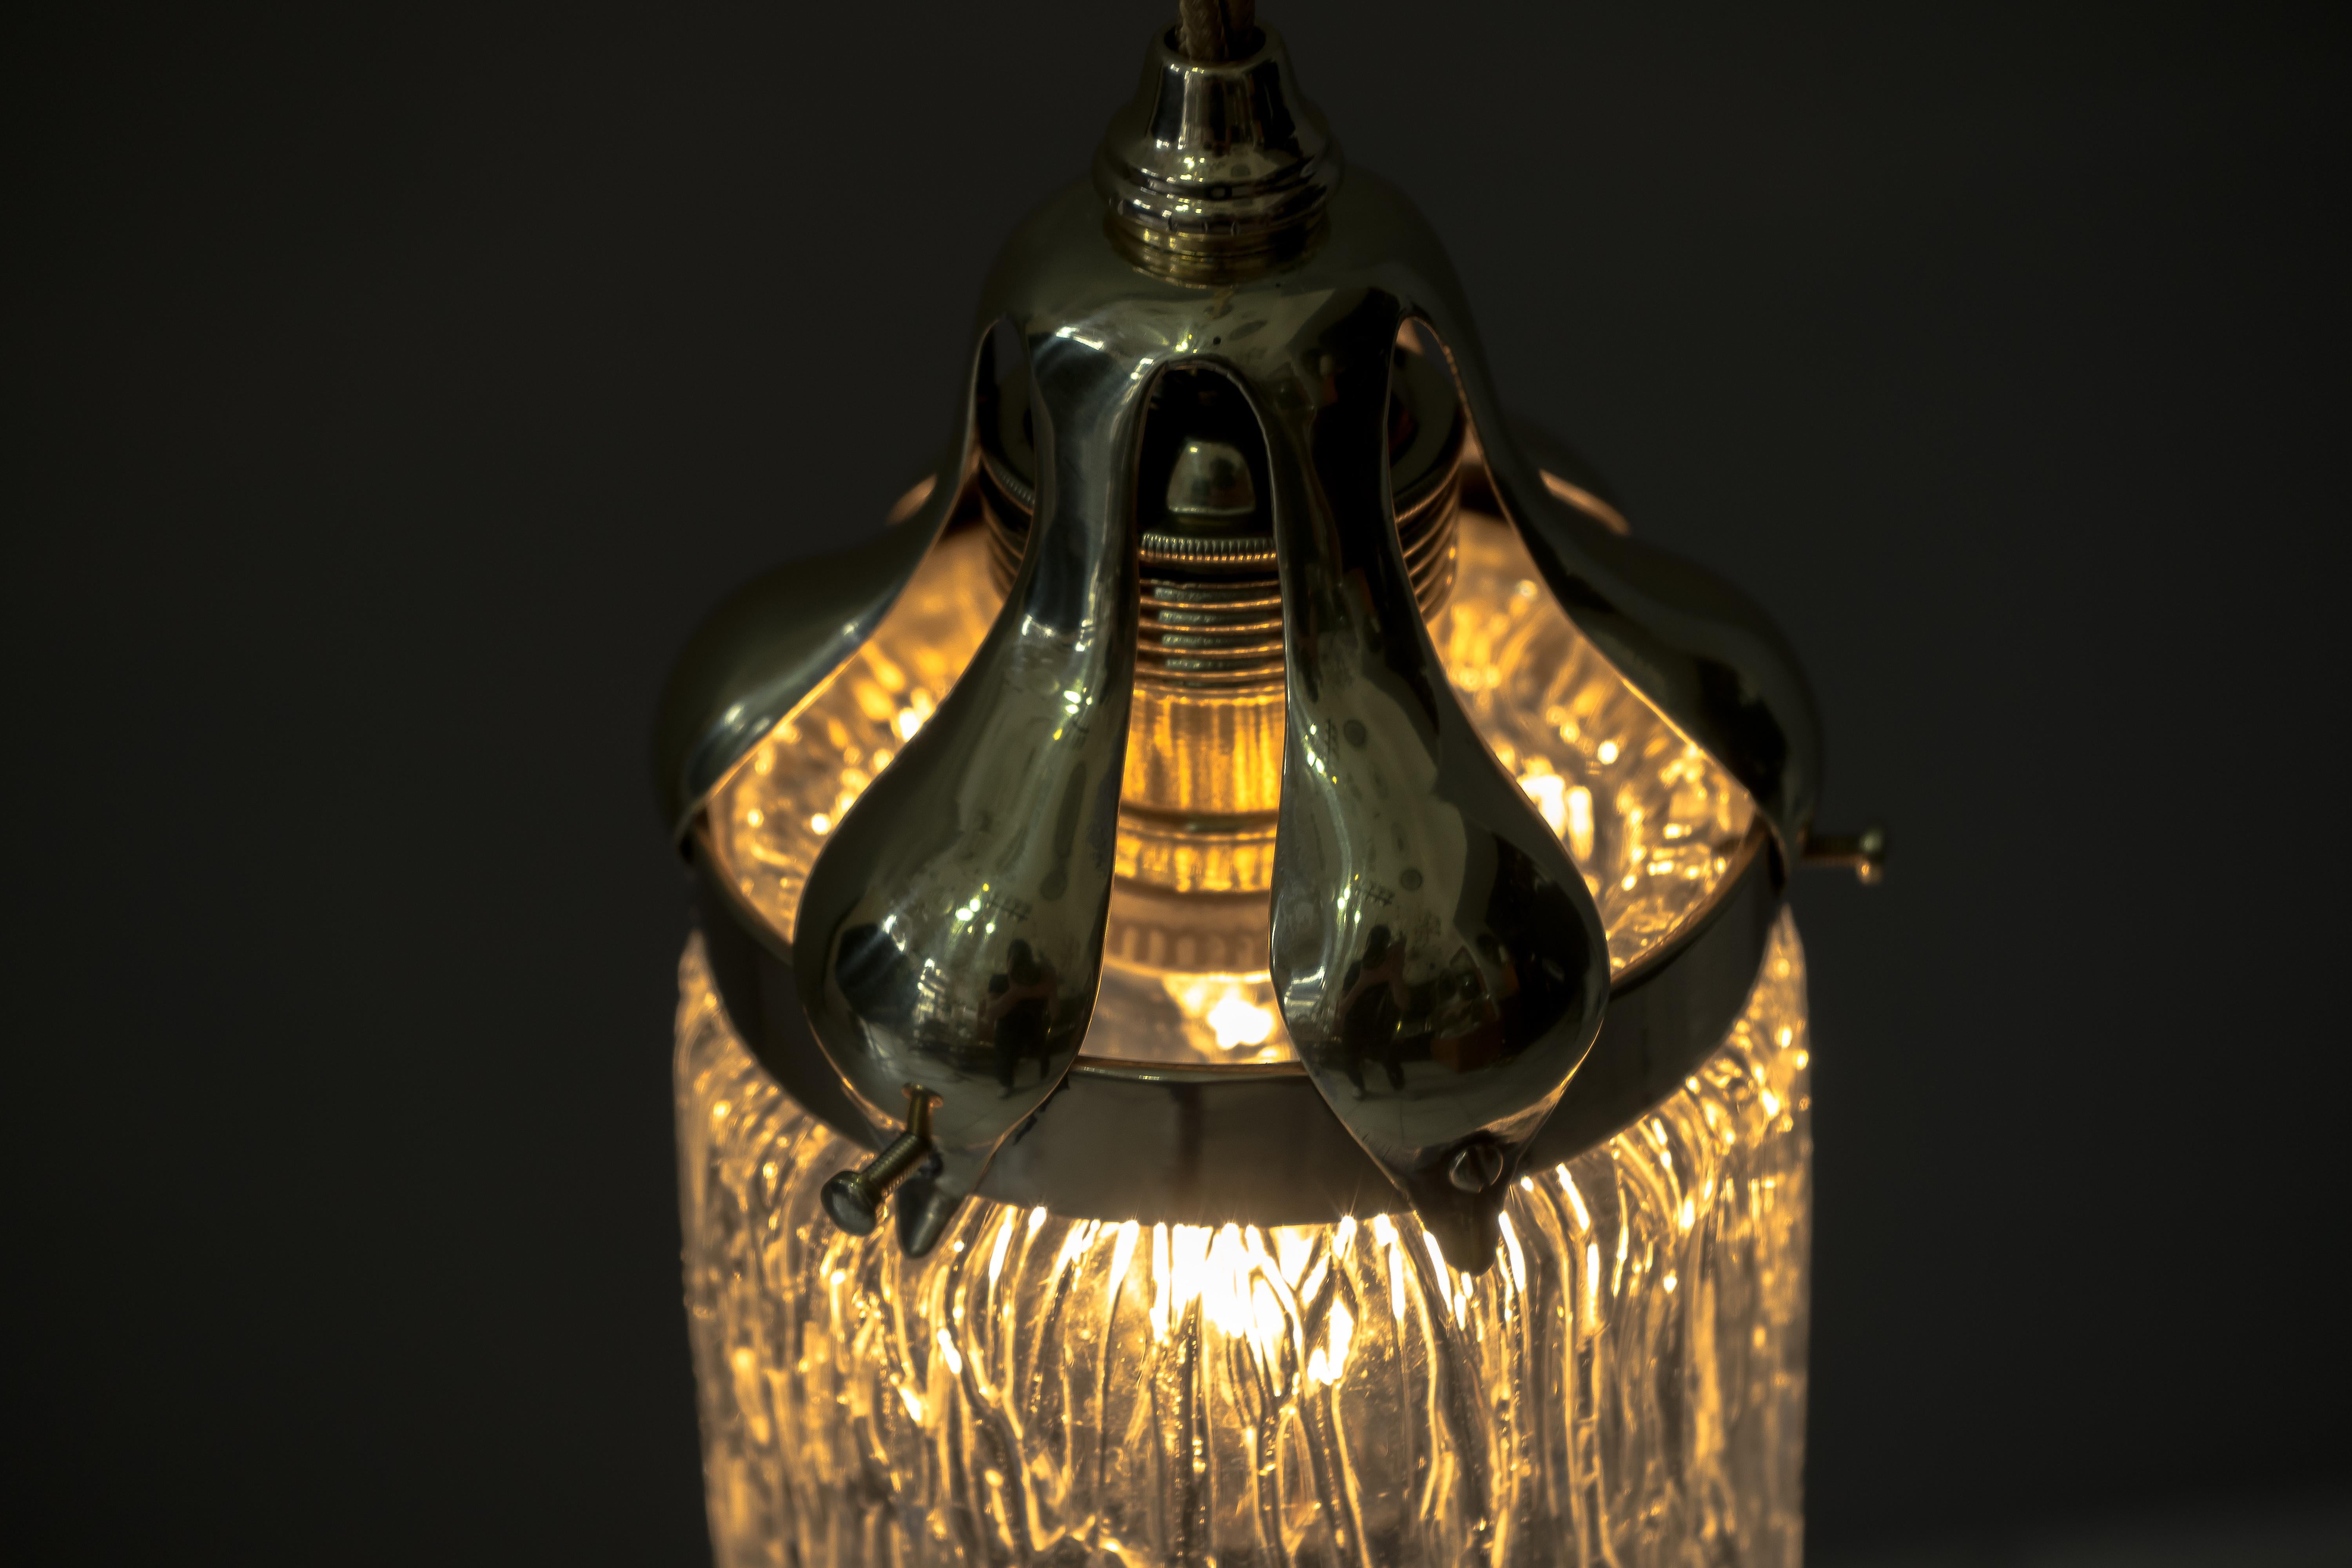 Leopold Bauer Hanging Lamp with Loetz Witwe “Blitzglas” Shade, circa 1905 For Sale 2